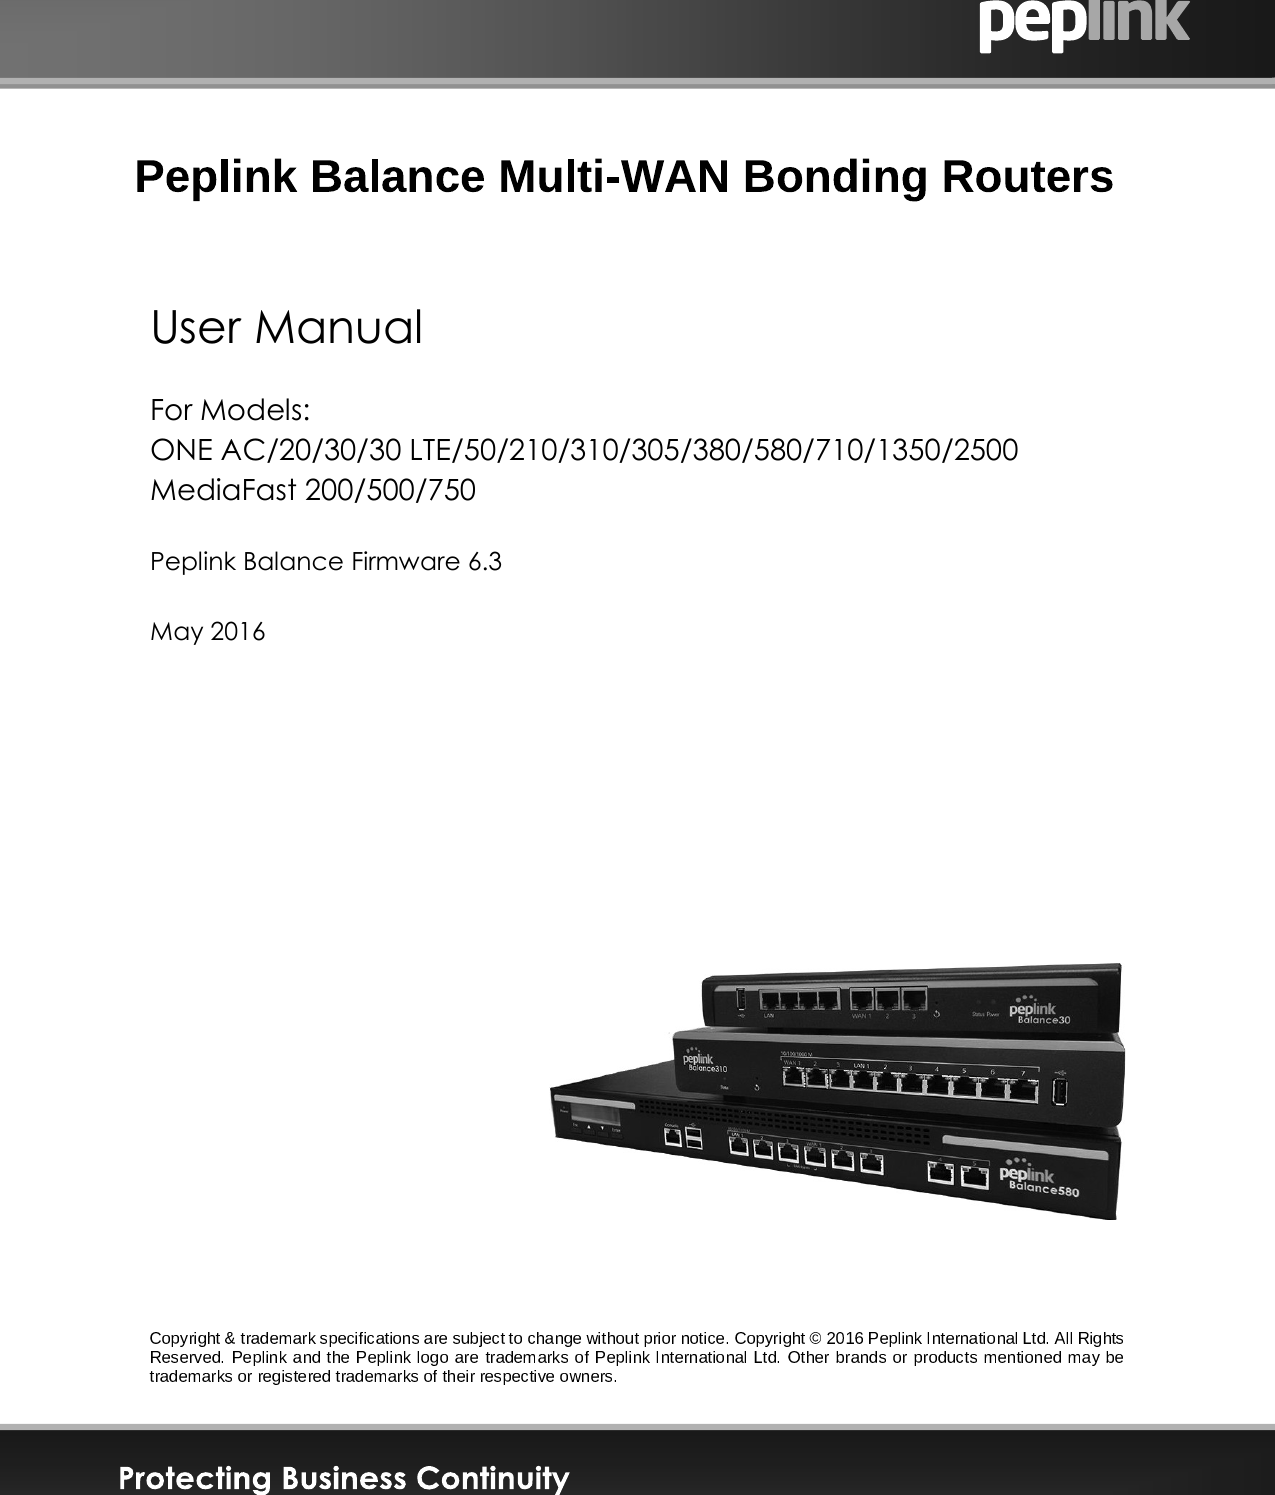       User Manual For Models: ONE AC/20/30/30 LTE/50/210/310/305/380/580/710/1350/2500 MediaFast 200/500/750  Peplink Balance Firmware 6.3  May 2016              